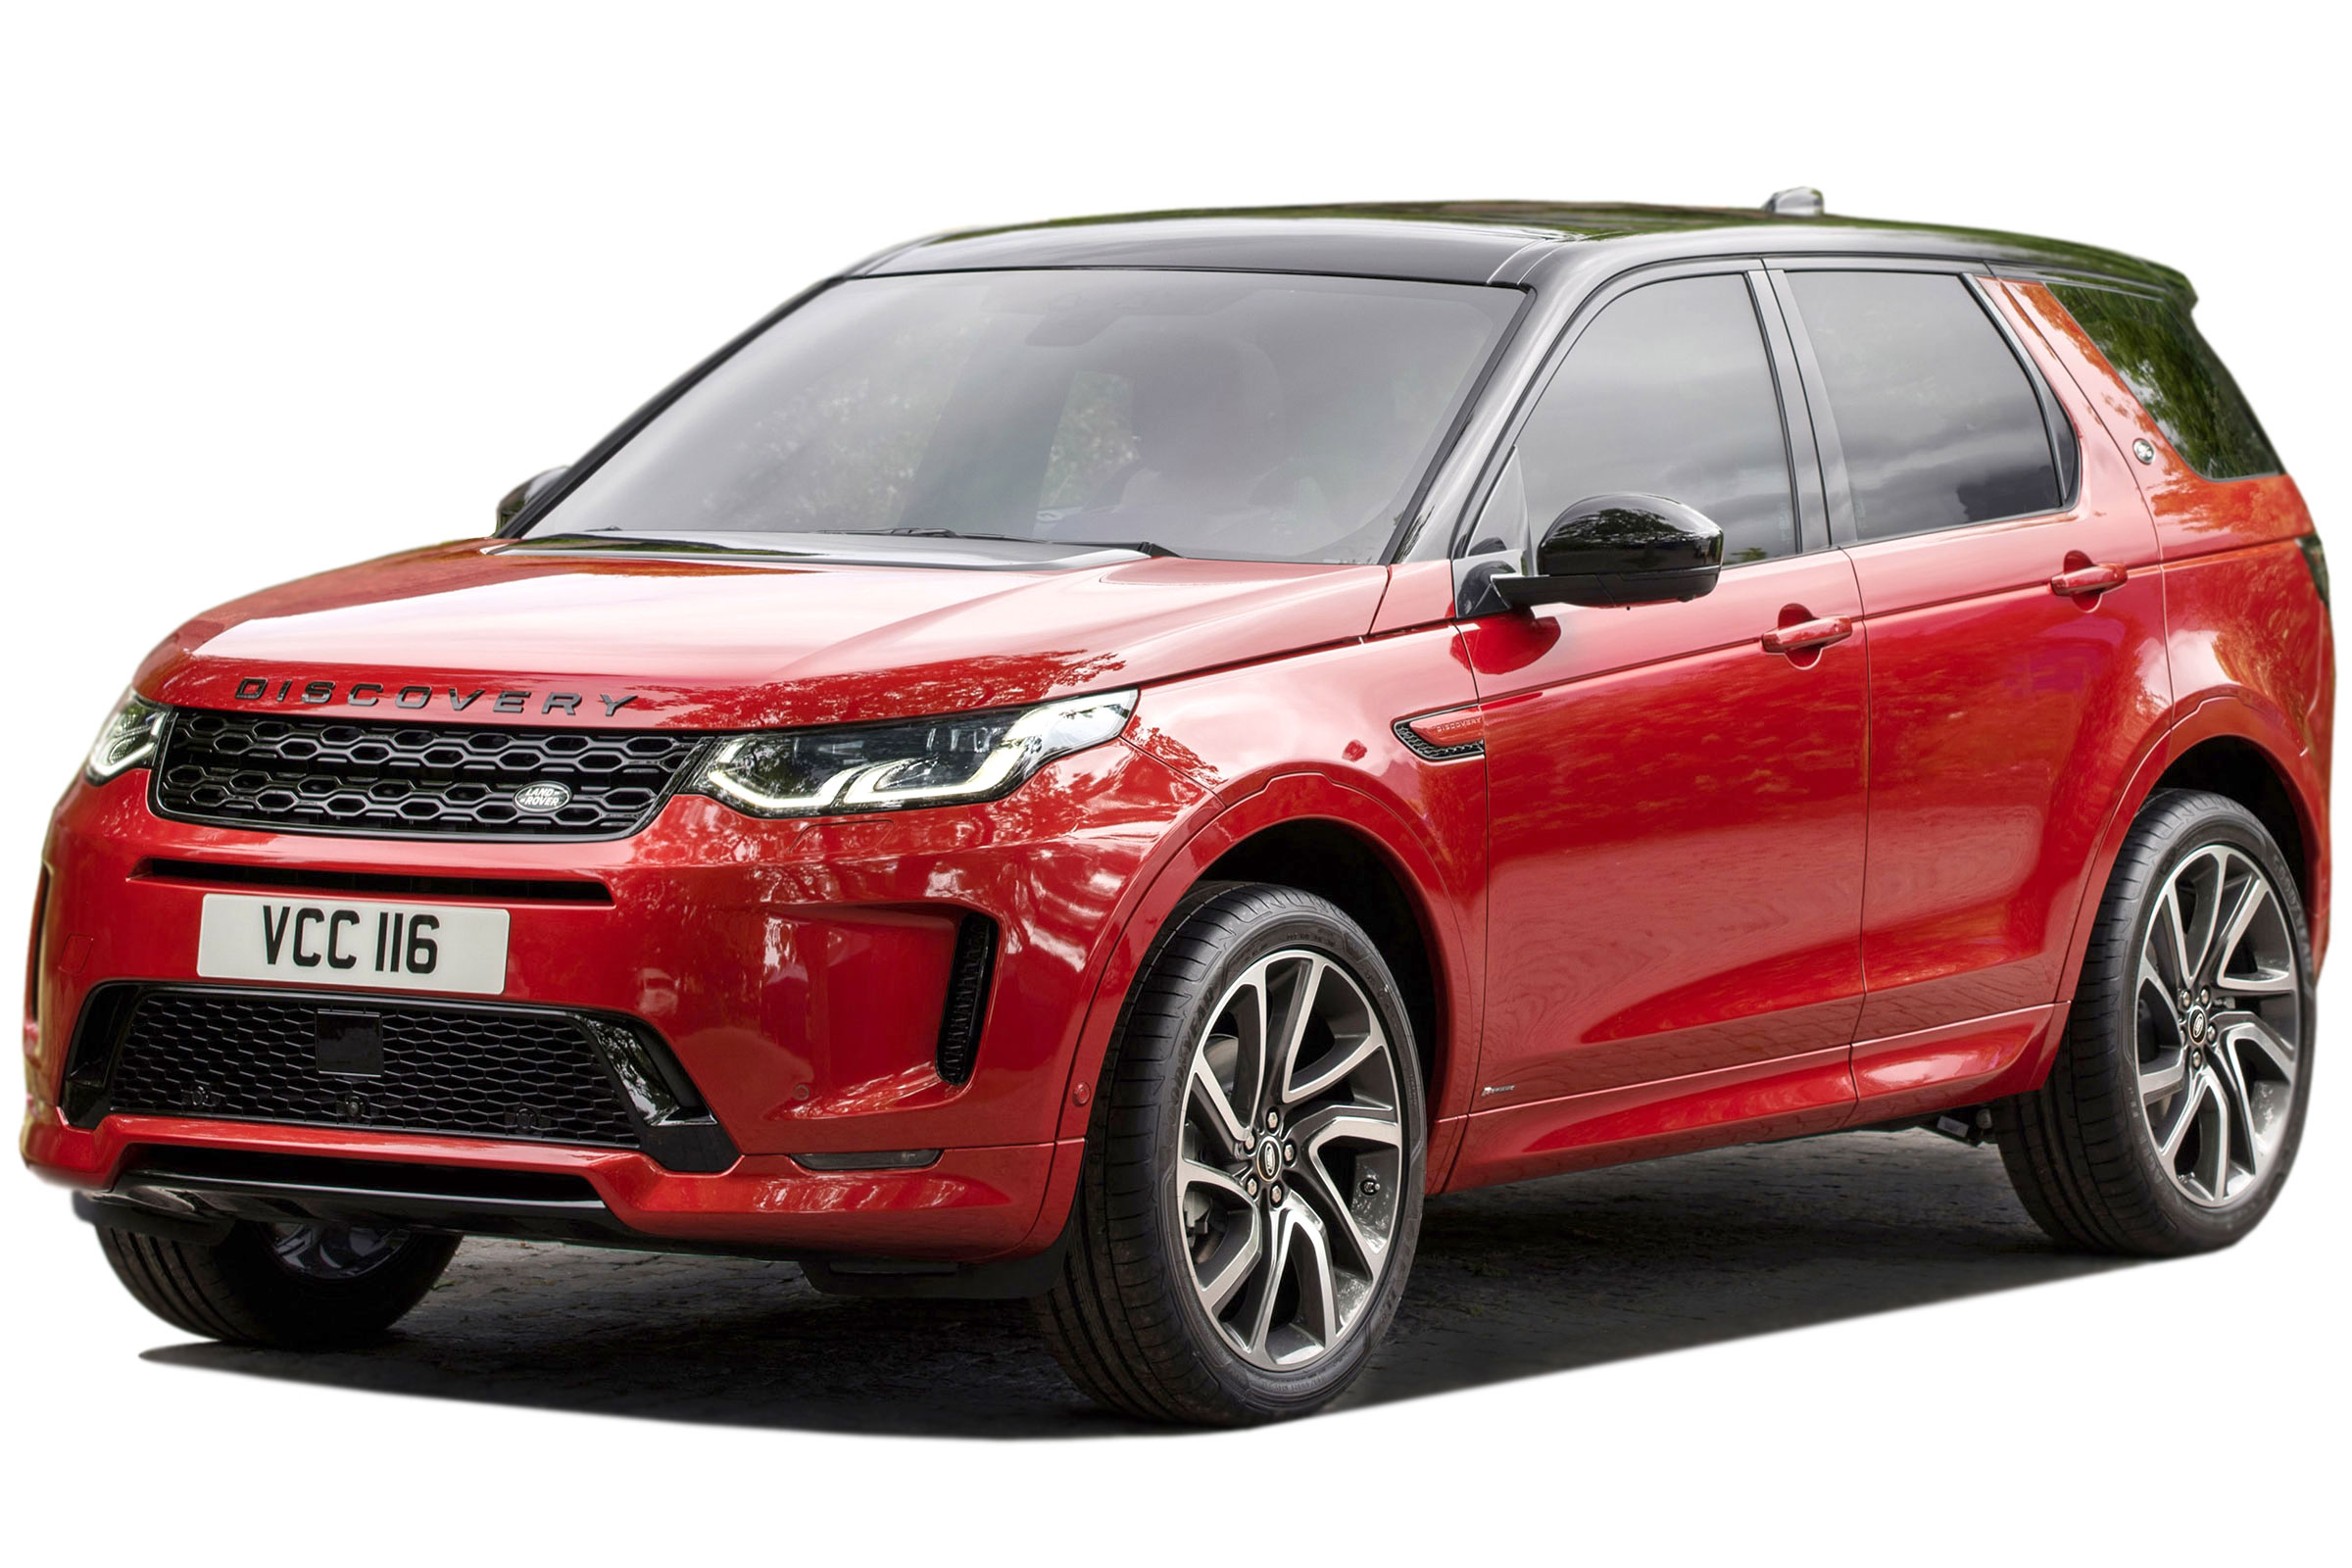 News - 2014 Land Rover Discovery Major Updates